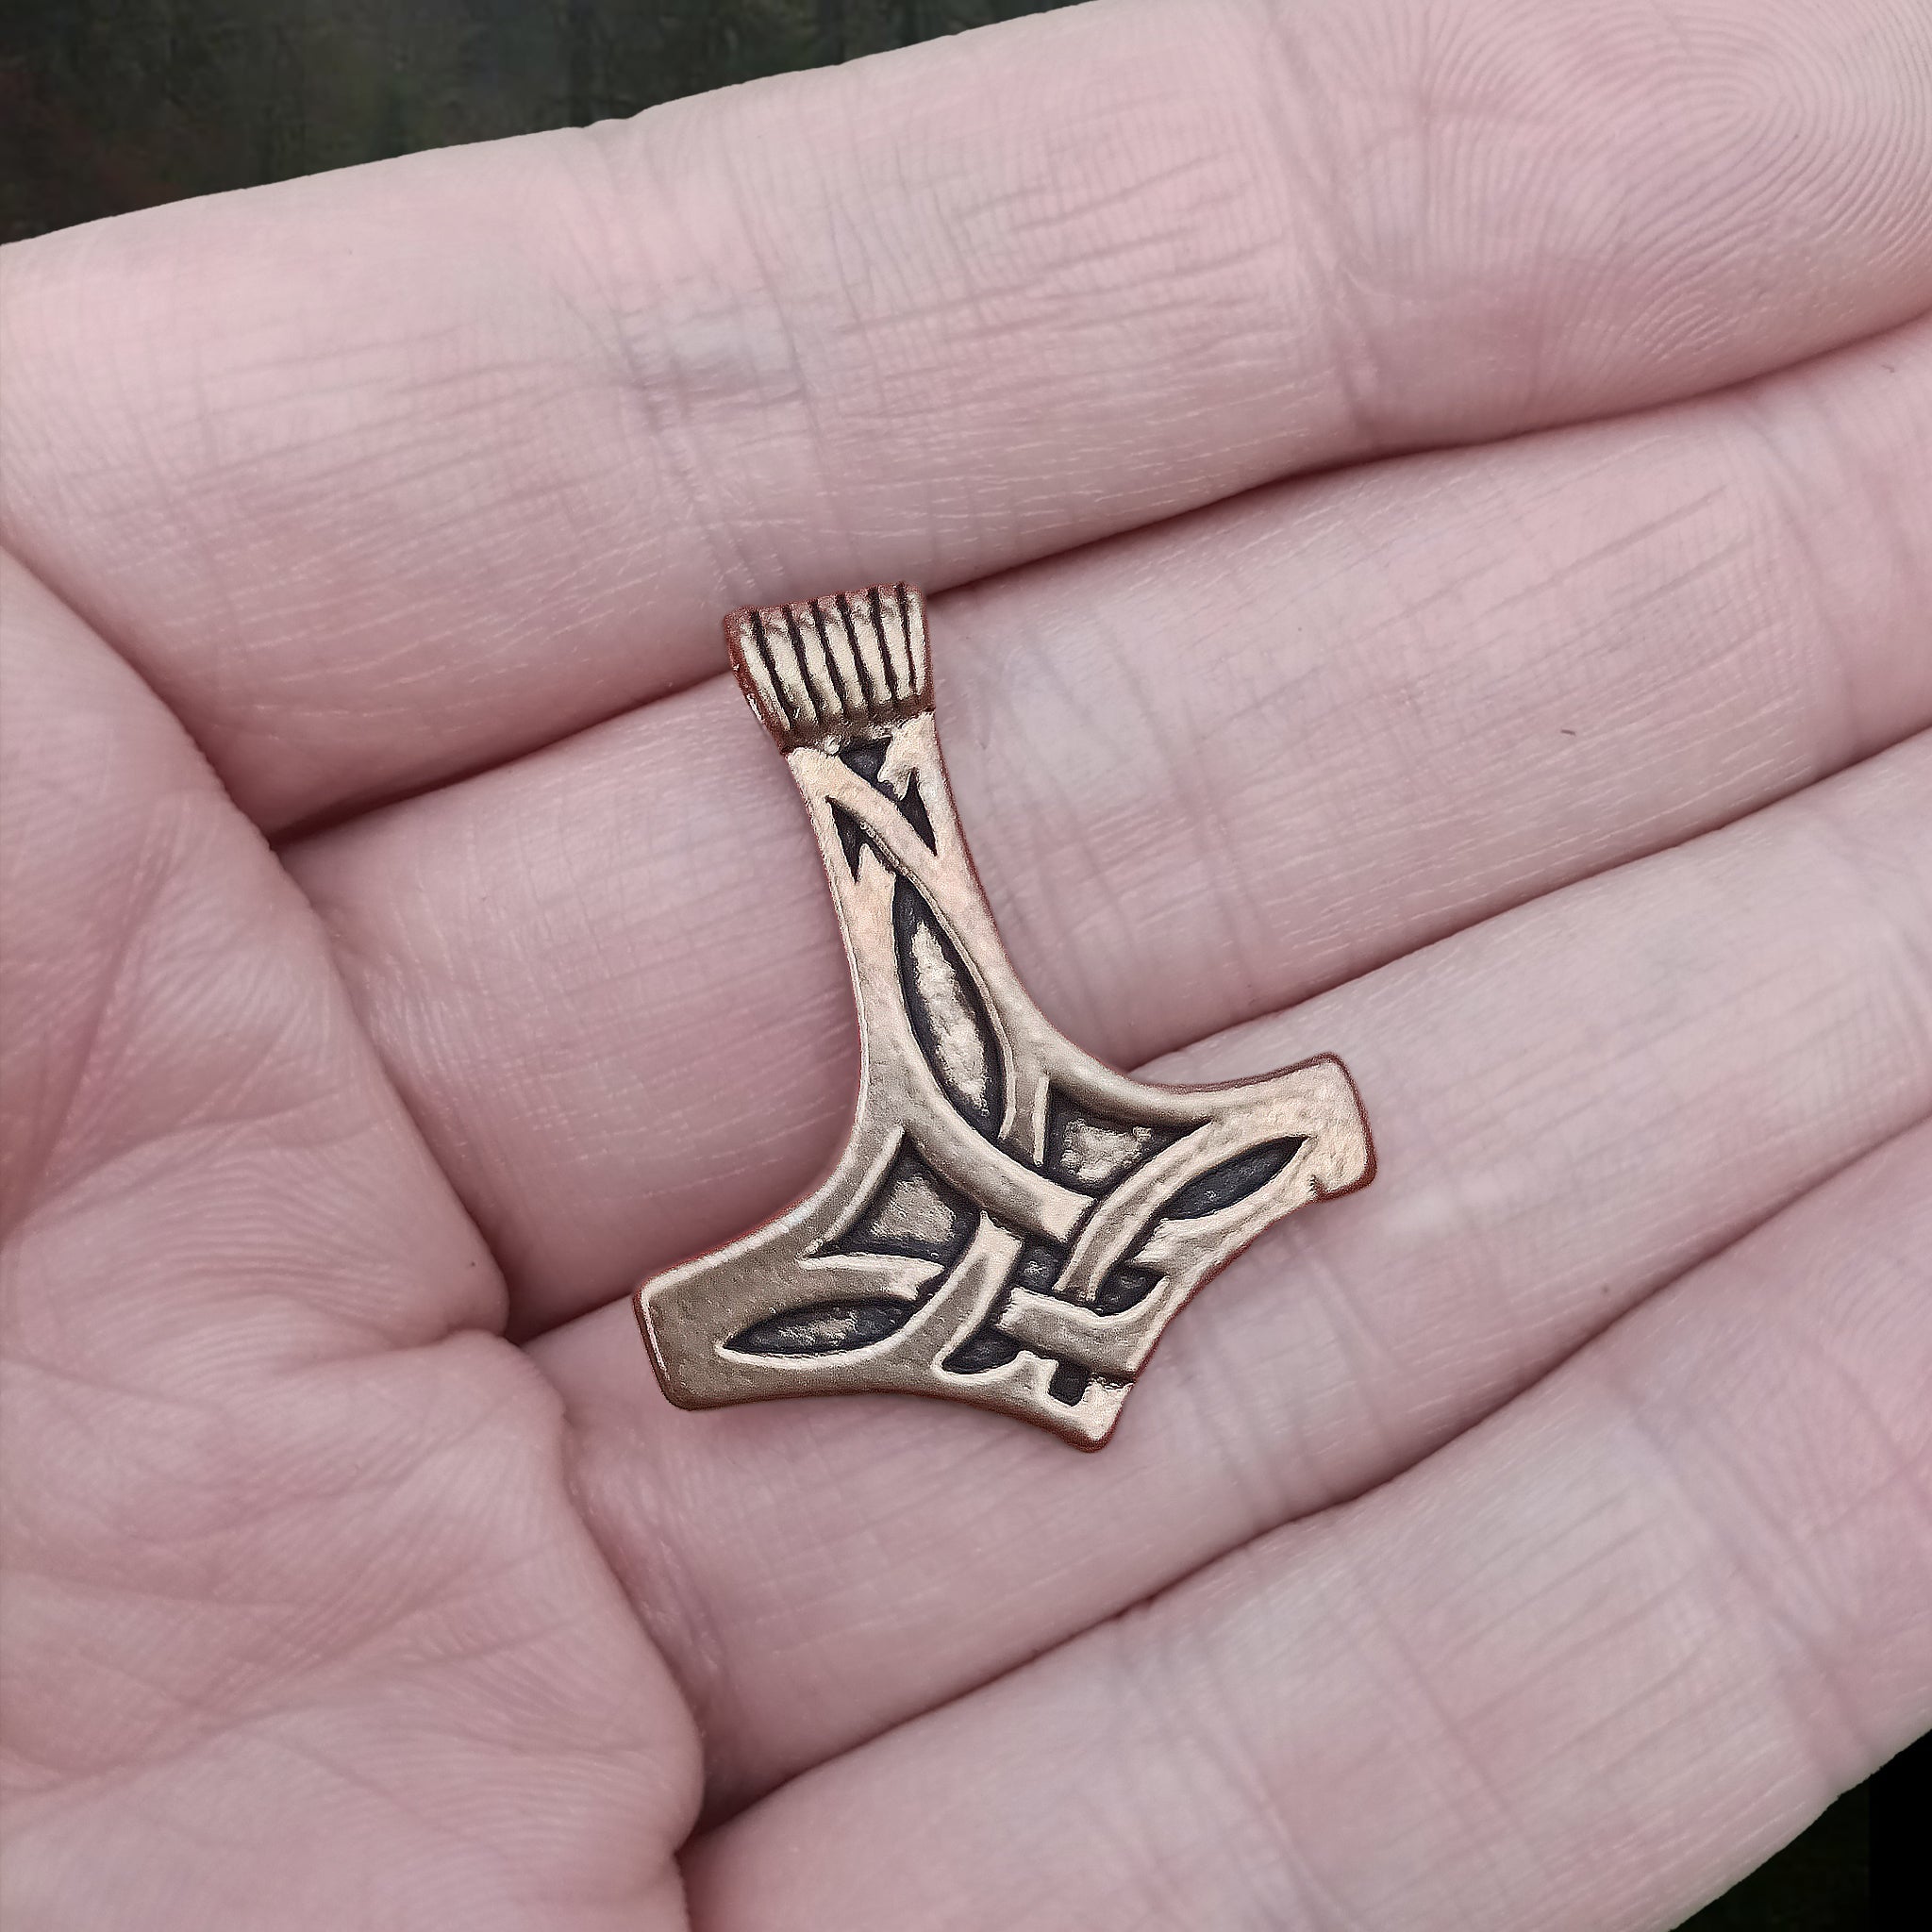 Bronze Thors Hammer Pendant with Knotwork Design on Hand